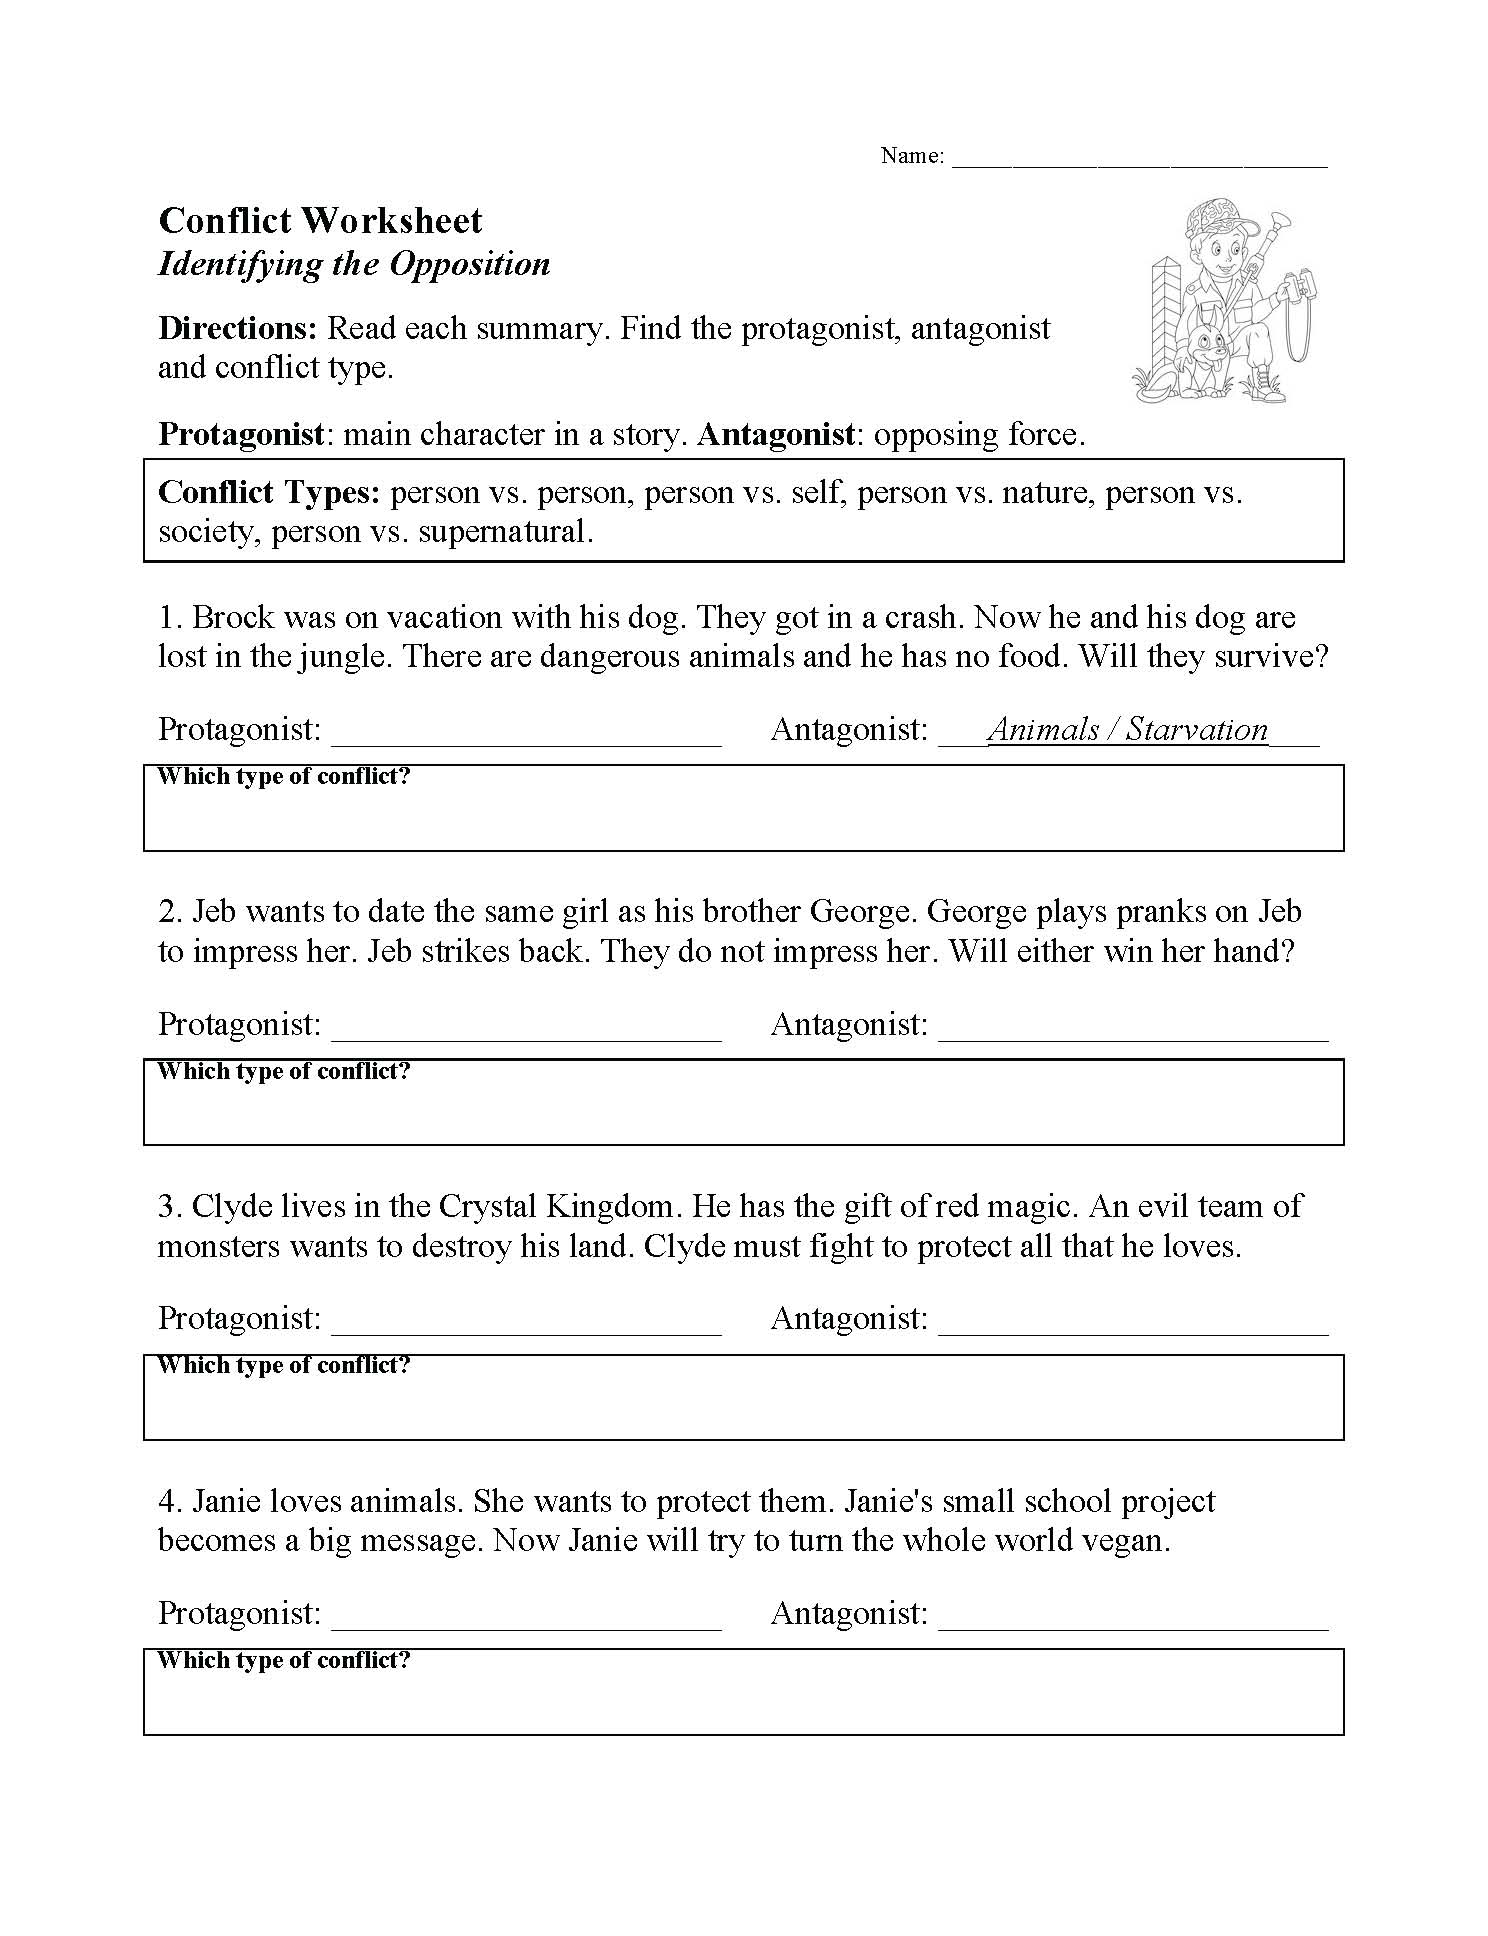 Elements of Fiction Worksheets  Free for Primary Grades With Regard To Protagonist And Antagonist Worksheet